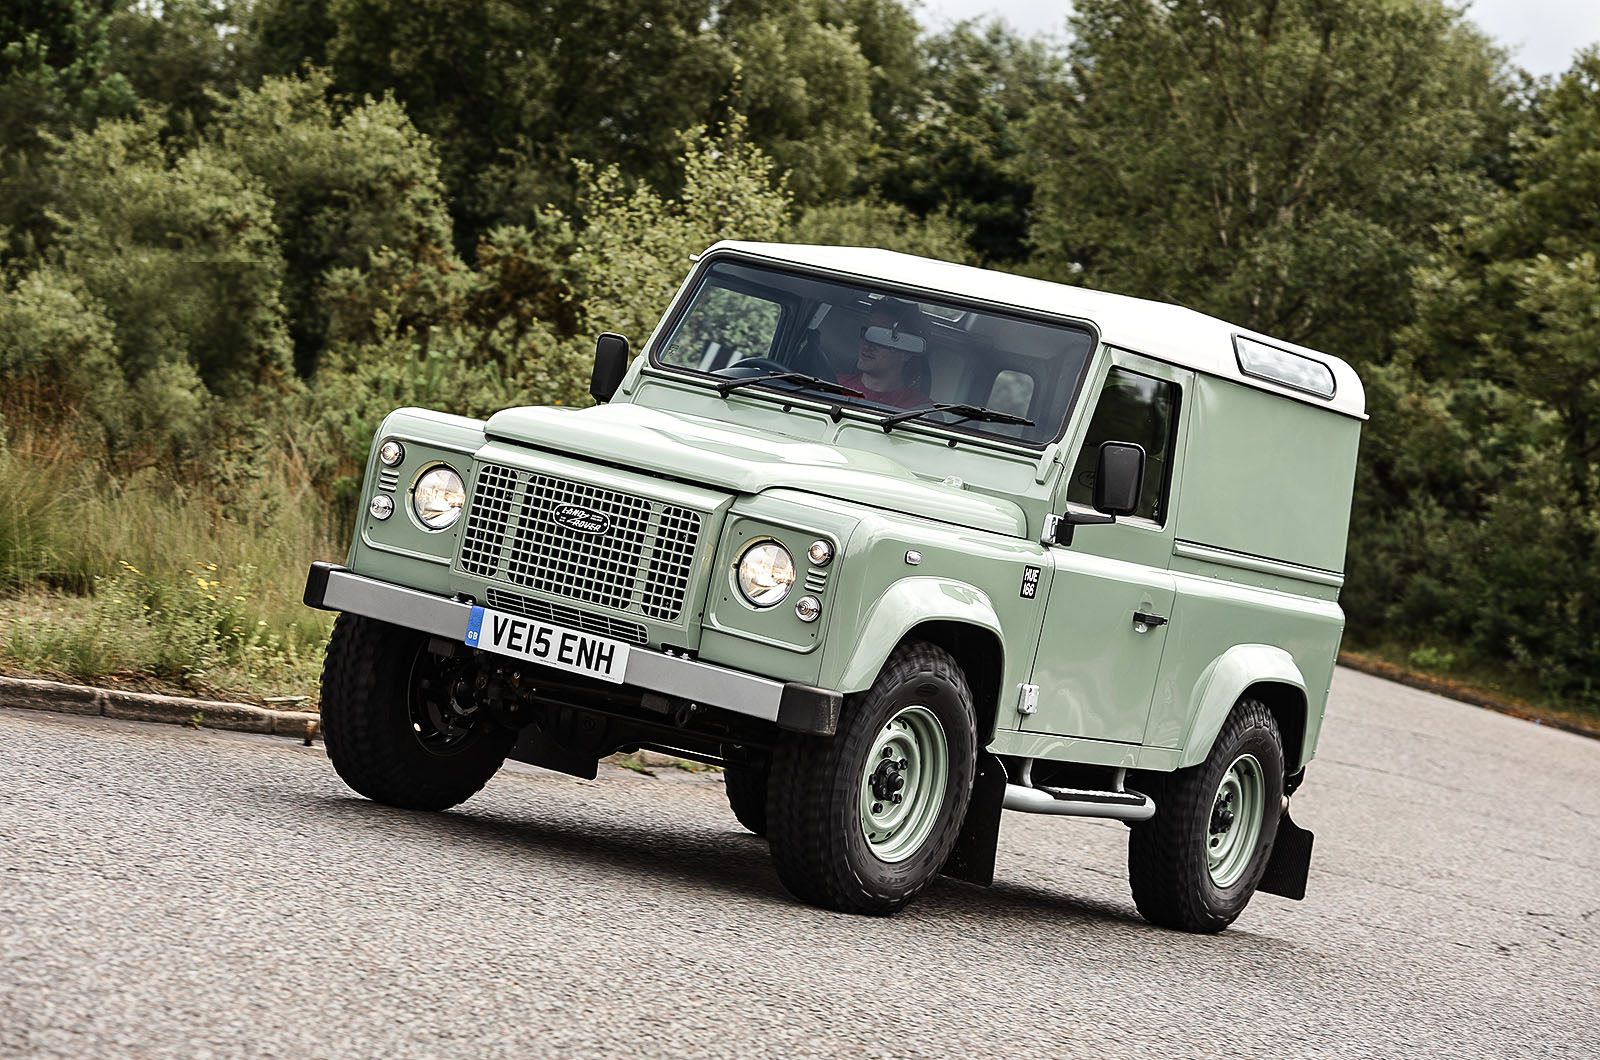 2015 Land Rover Defender 90 Heritage UK review review